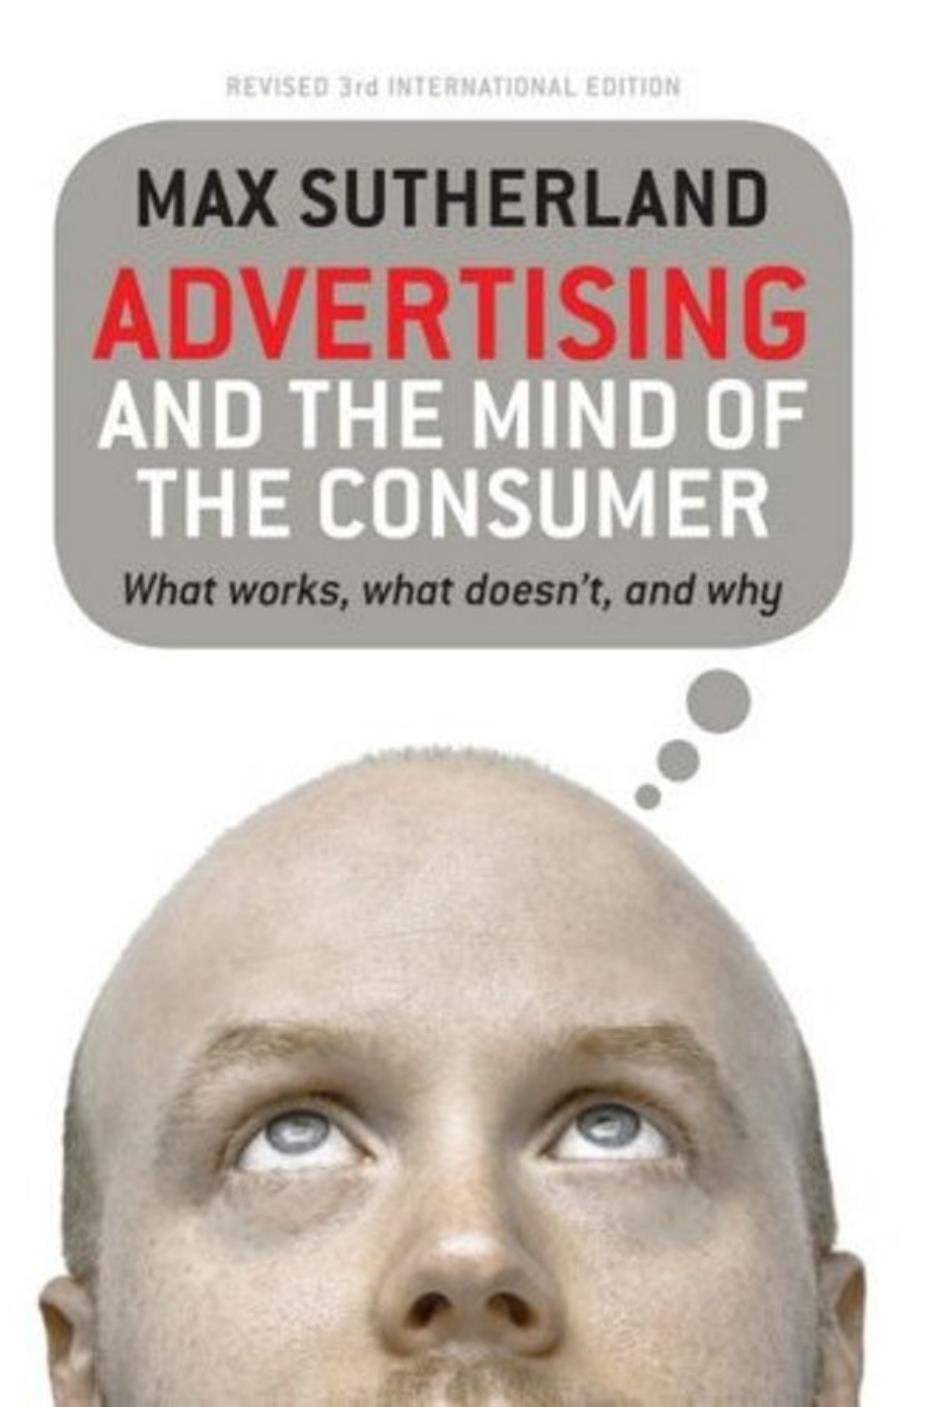 Max Sutherland Advertising and the Mind of the Consumer 2009